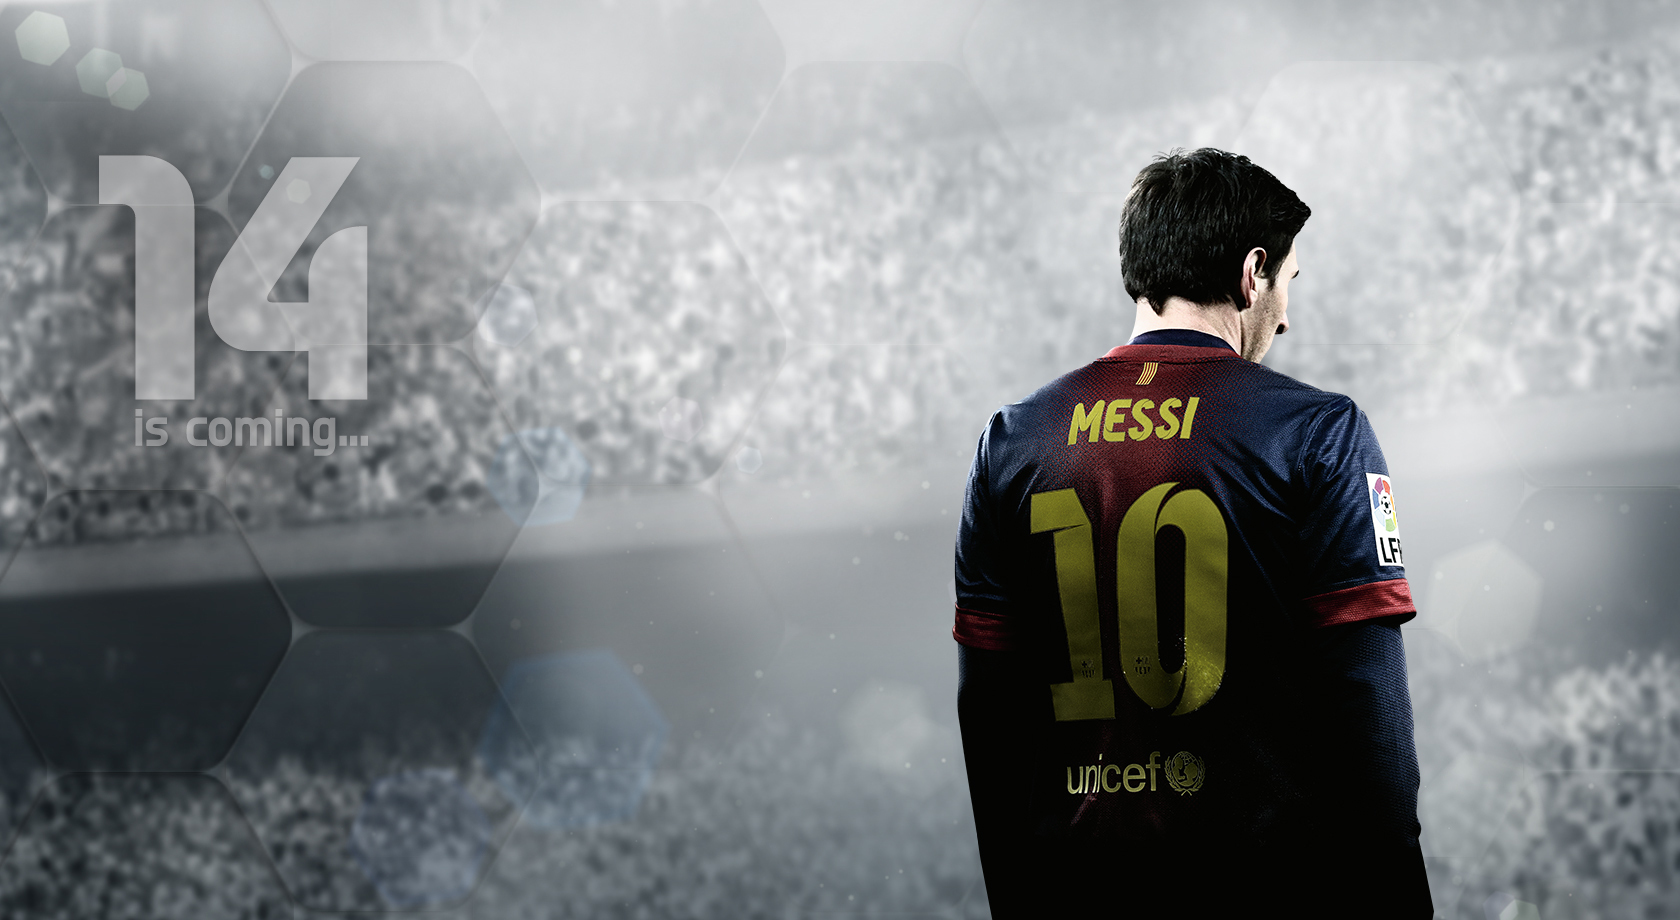 fifa 14, video game